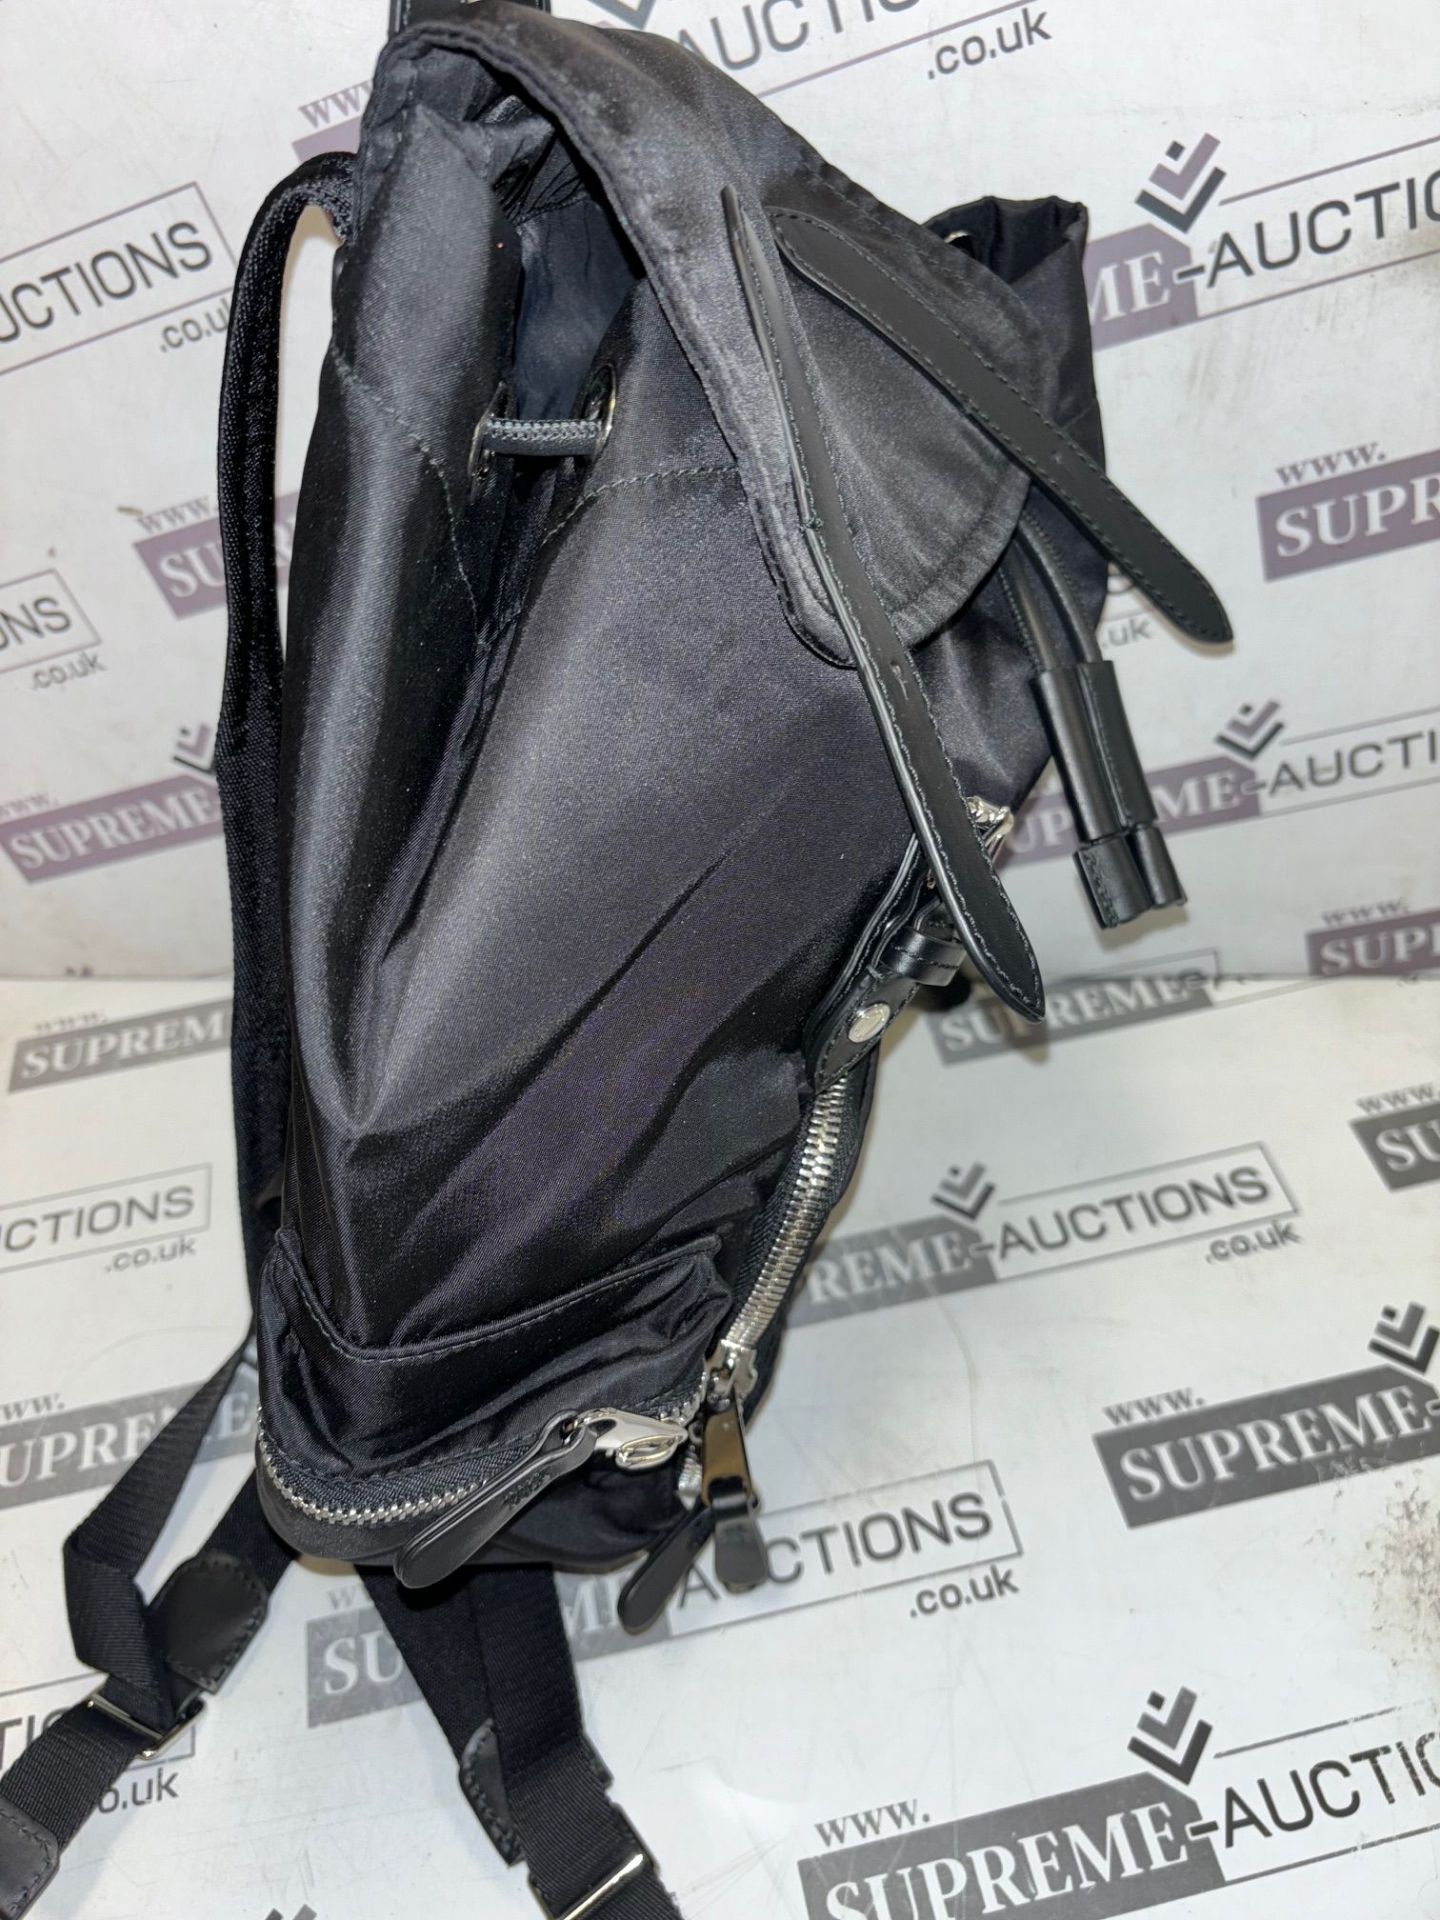 Genuine Burberry Medium Rucksack In Technical Nylon And Leather - Image 6 of 9